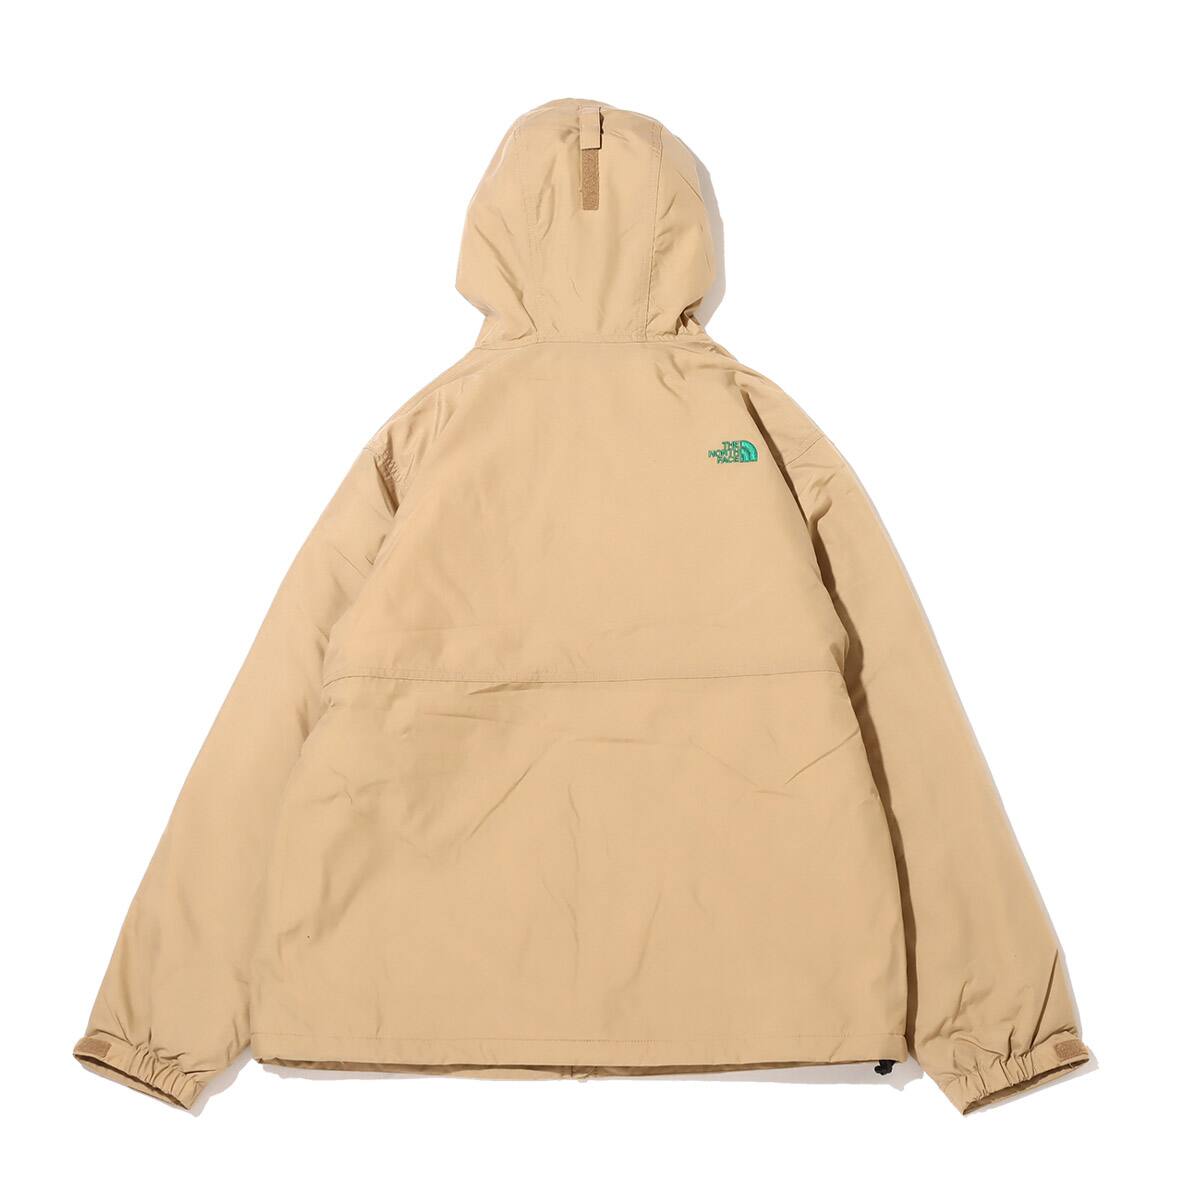 THE NORTH FACE COMPACT NOMAD JACKET ケルプタンxアマゾングリーン 22FW-I